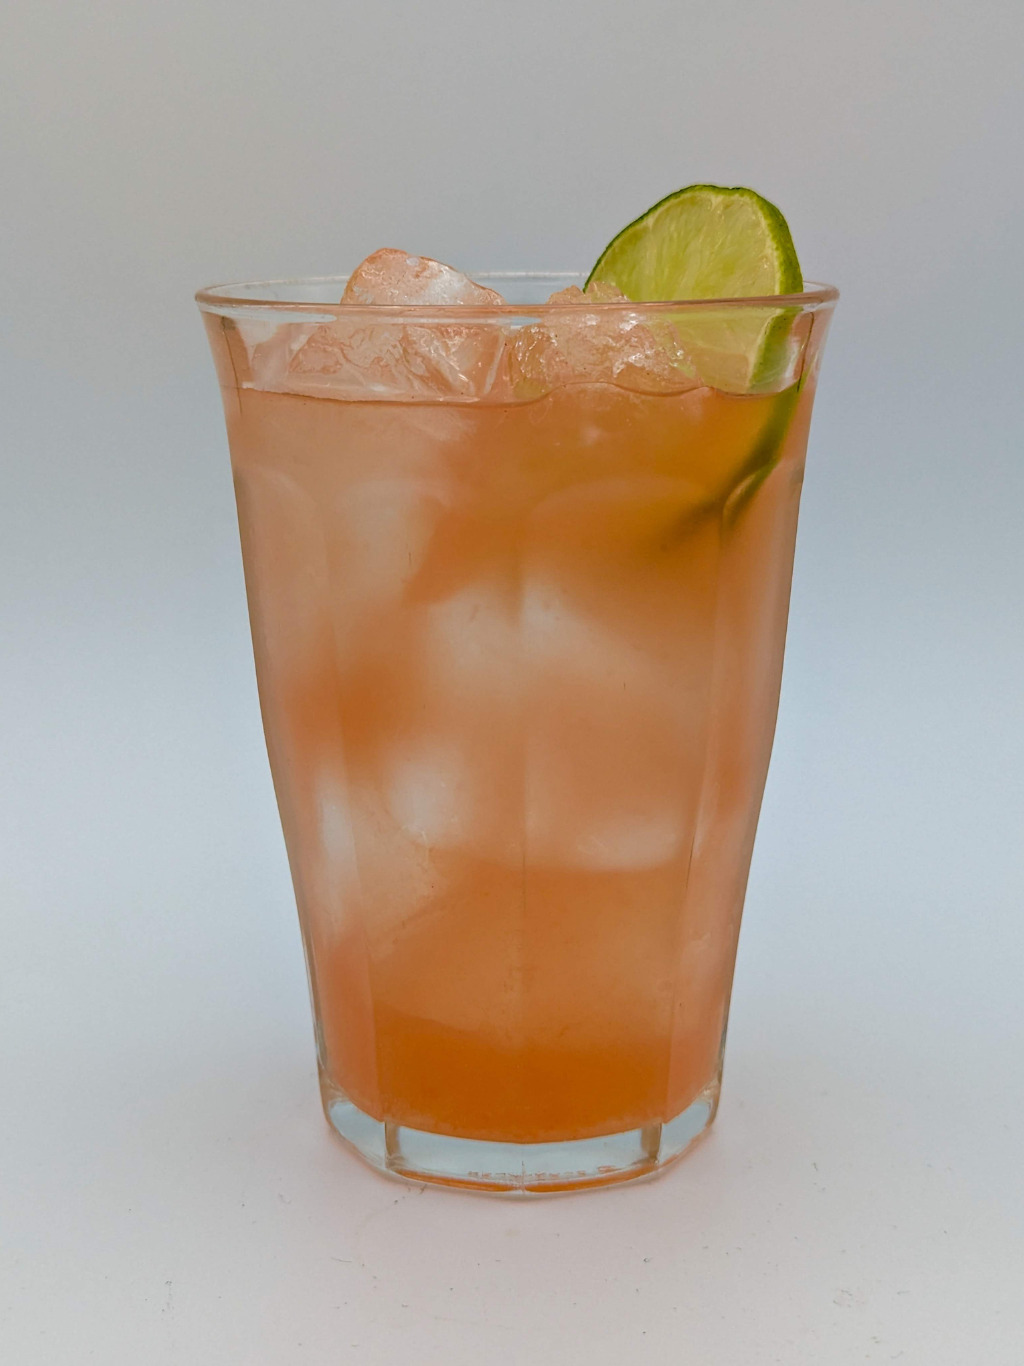 pink liquid in a tall glass with a lime wheel garnish